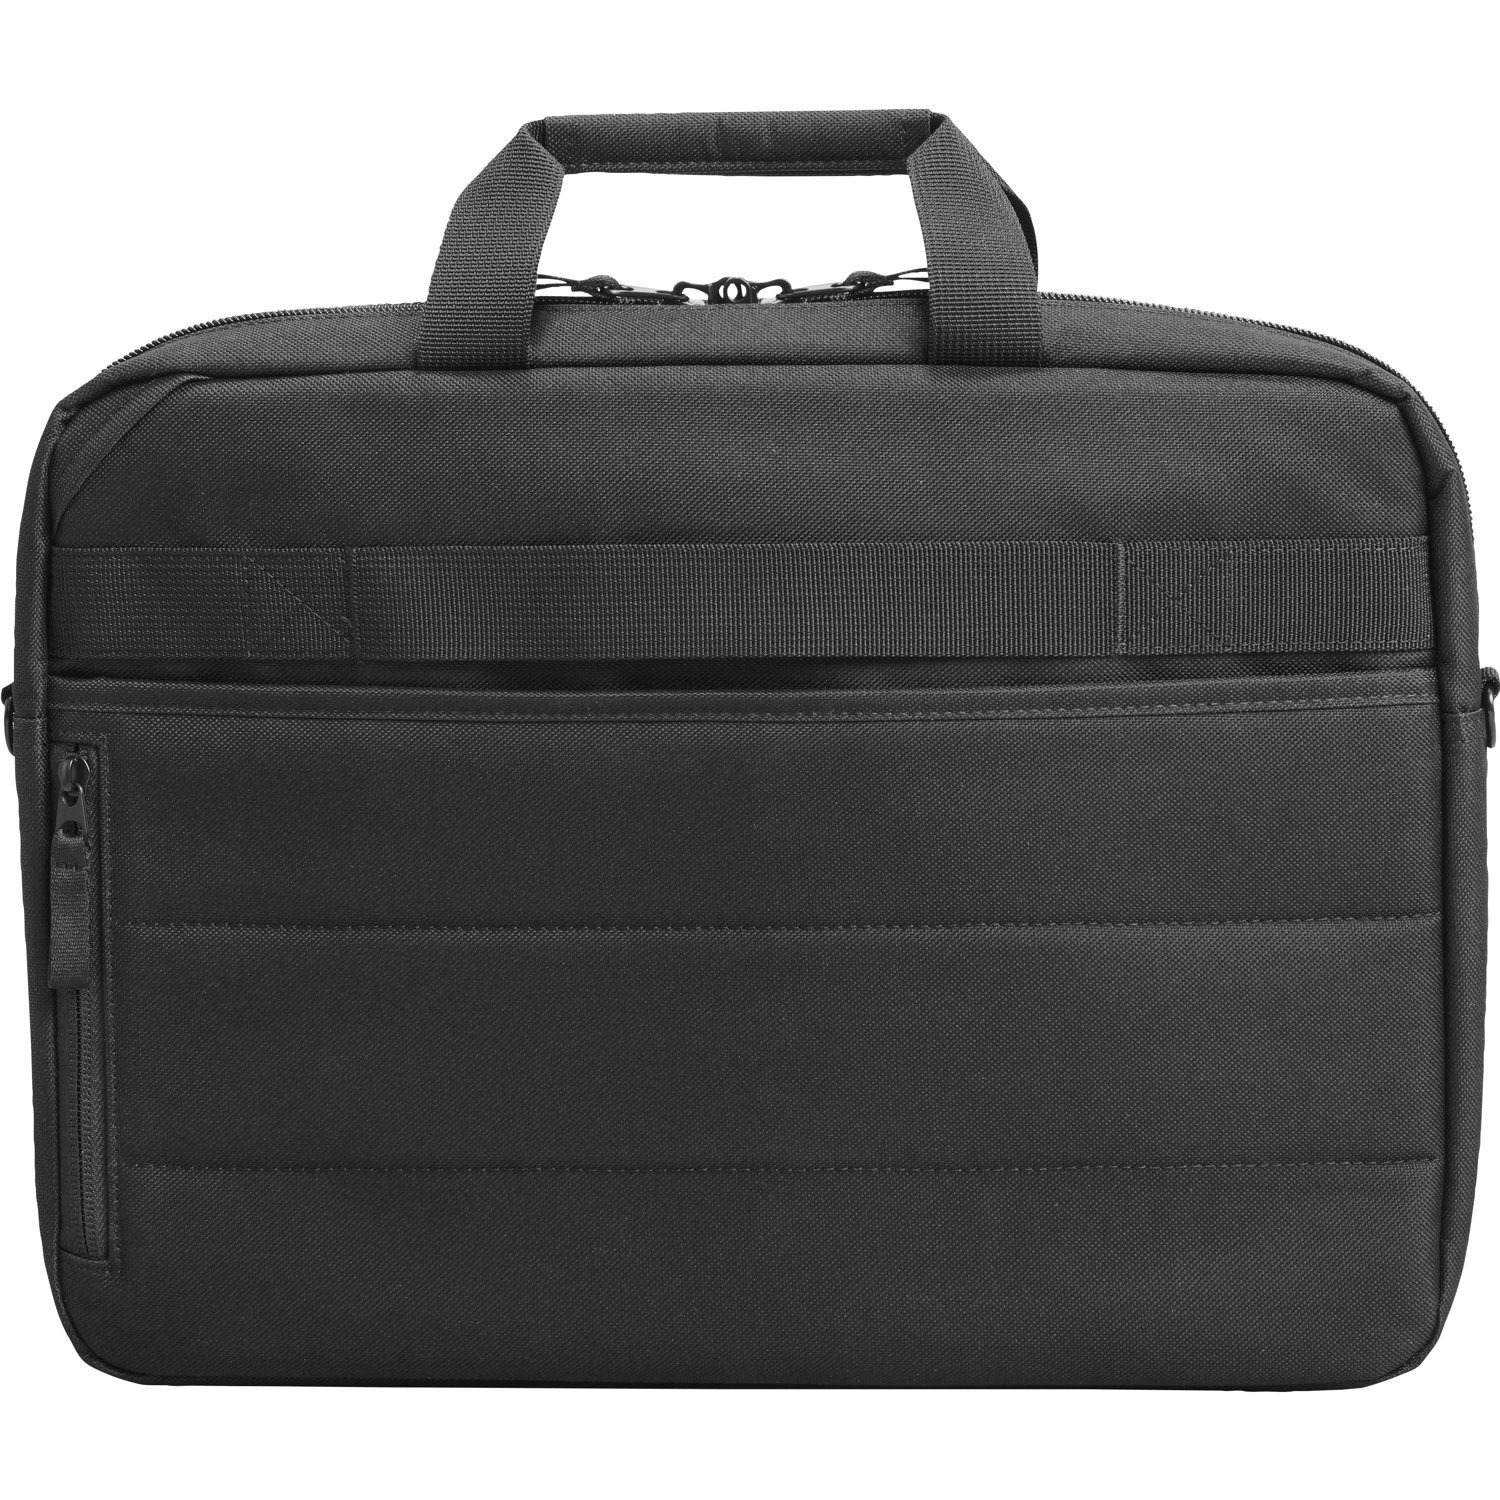 HP Renew Carrying Case (Messenger) for 15.6" HP Notebook - Black